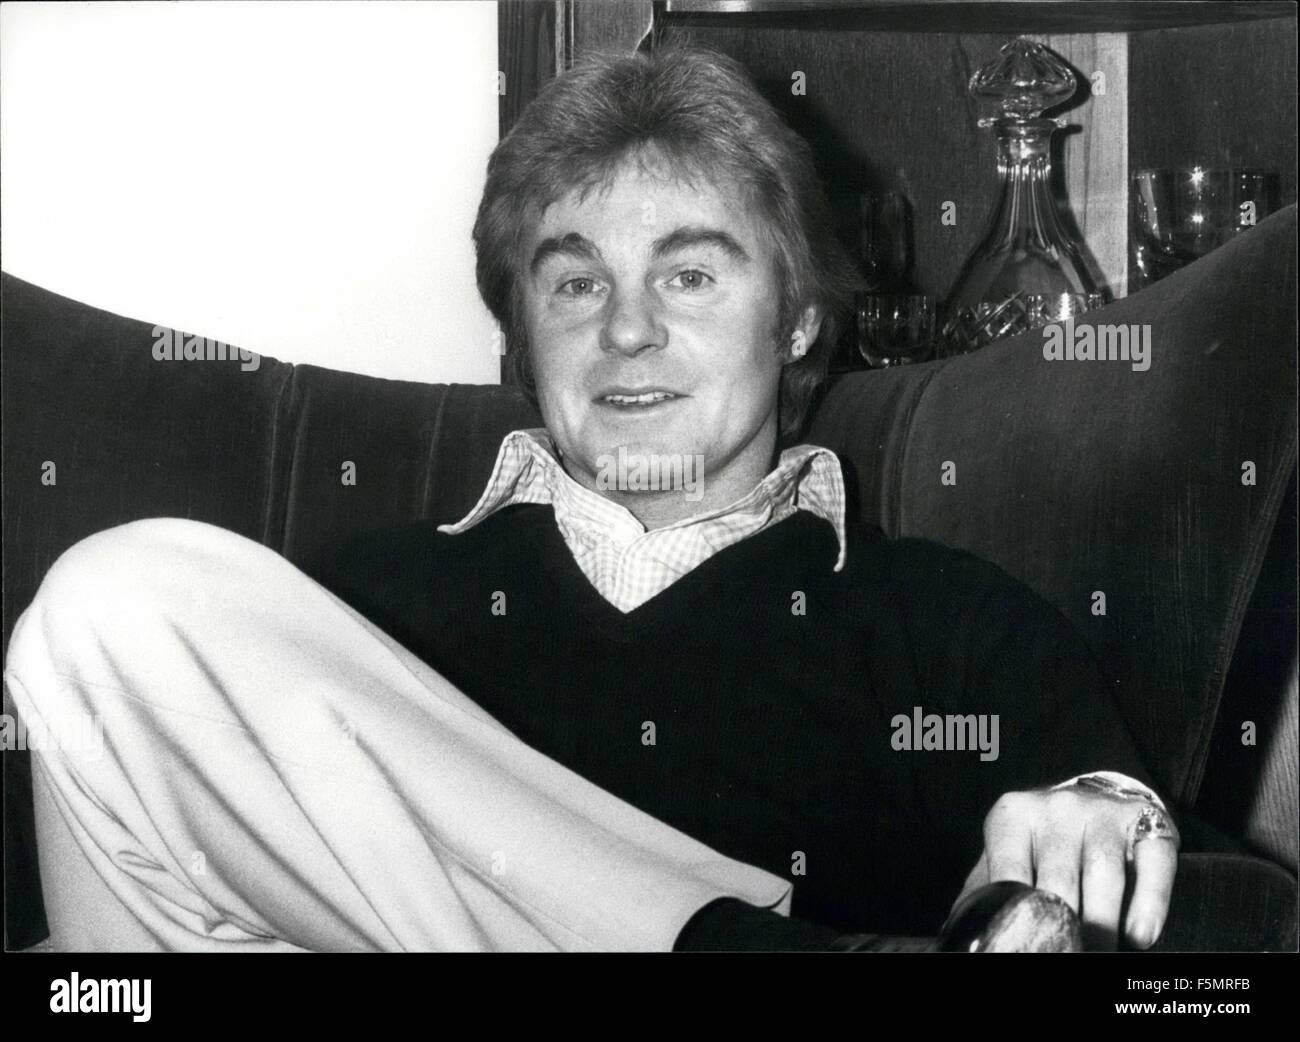 1972 - Derek Jacobi at Home : Derek Jacobi played the title role in the series ''I Claudius'' it was a performance that earned him enormous acclaim and a reputation as one of this country's finest actors, The part took Derek months to learn due to the peculiar nature of the Emperor Claudius's physical and speech defects. He became so expert at stuttering and shaking his head that for a considerable time after the series he could not stop himself from continuing the habits. At present Derek is taking a well deserved rest having recently returned from a tour - He is soon to tour with the prospec Stock Photo